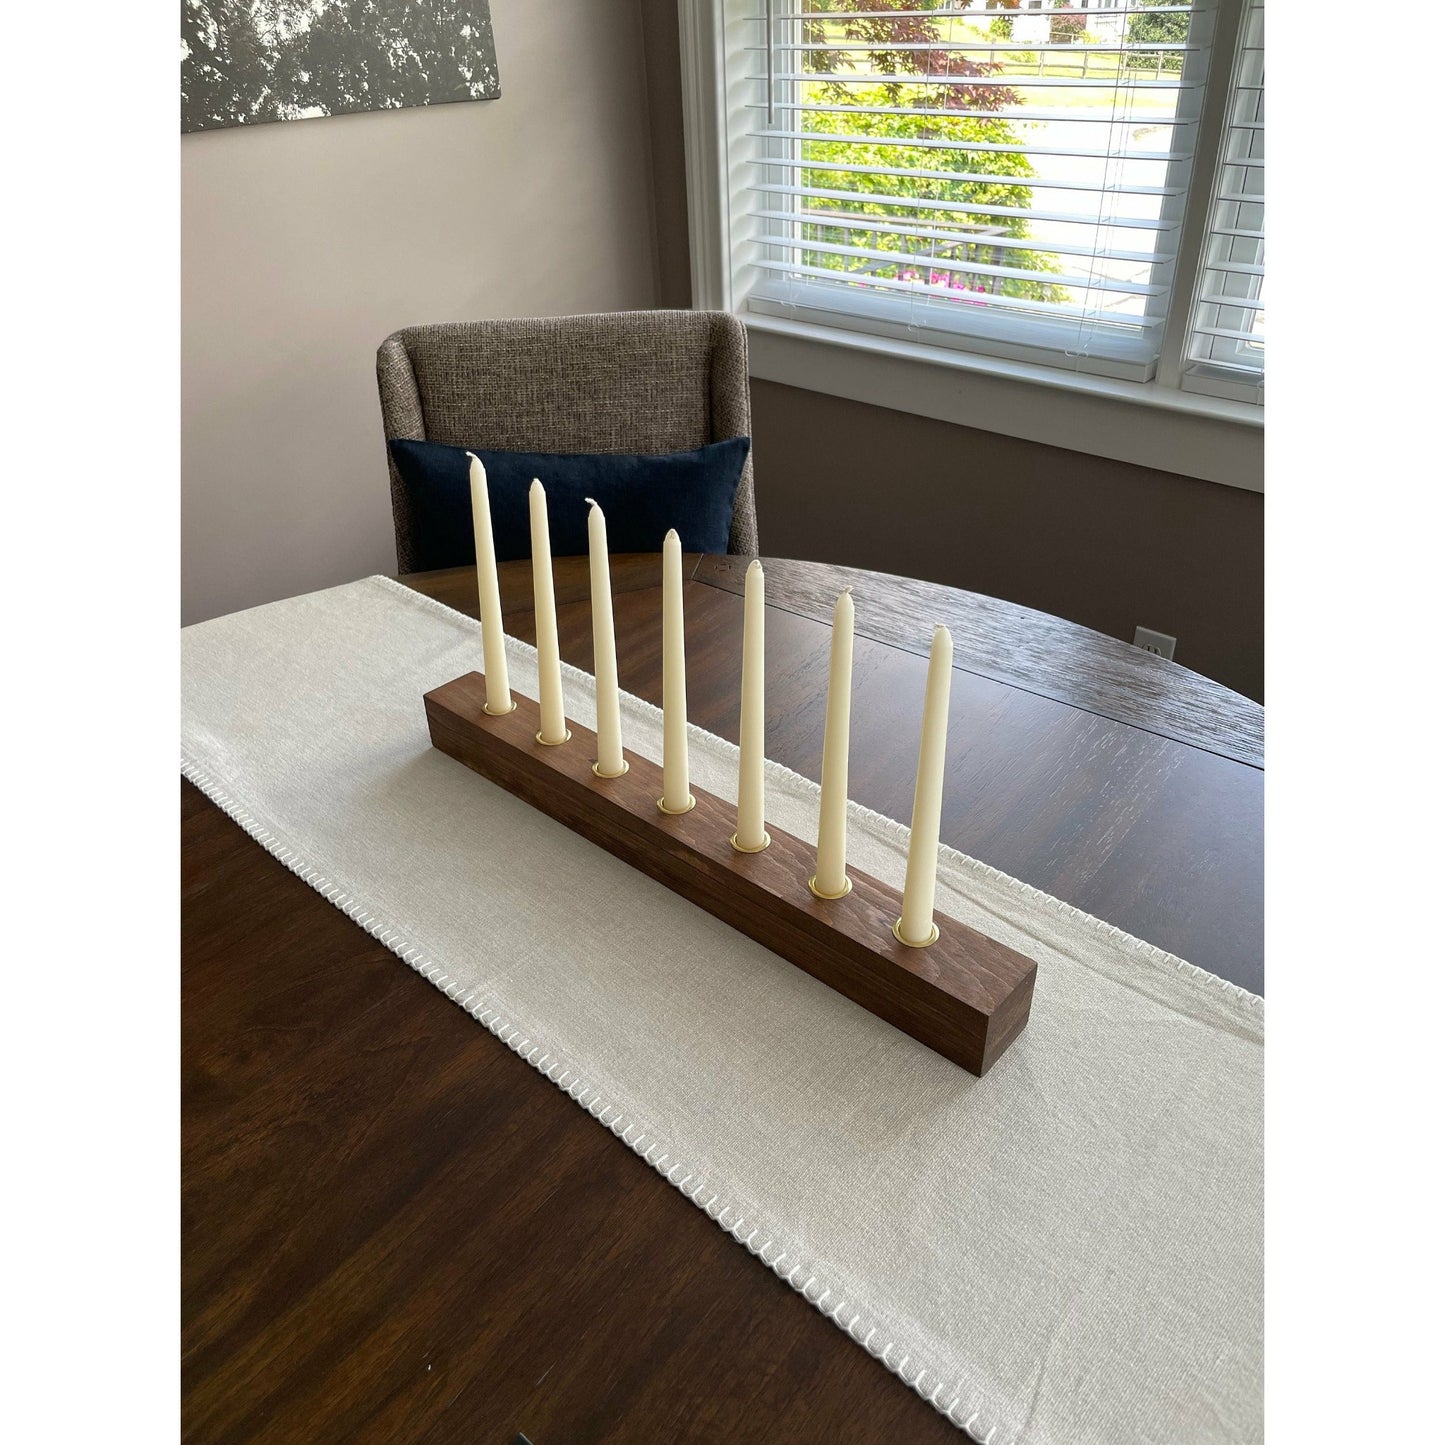 Long Taper Candleholder Holds 7 Candles Dining Table Centerpiece